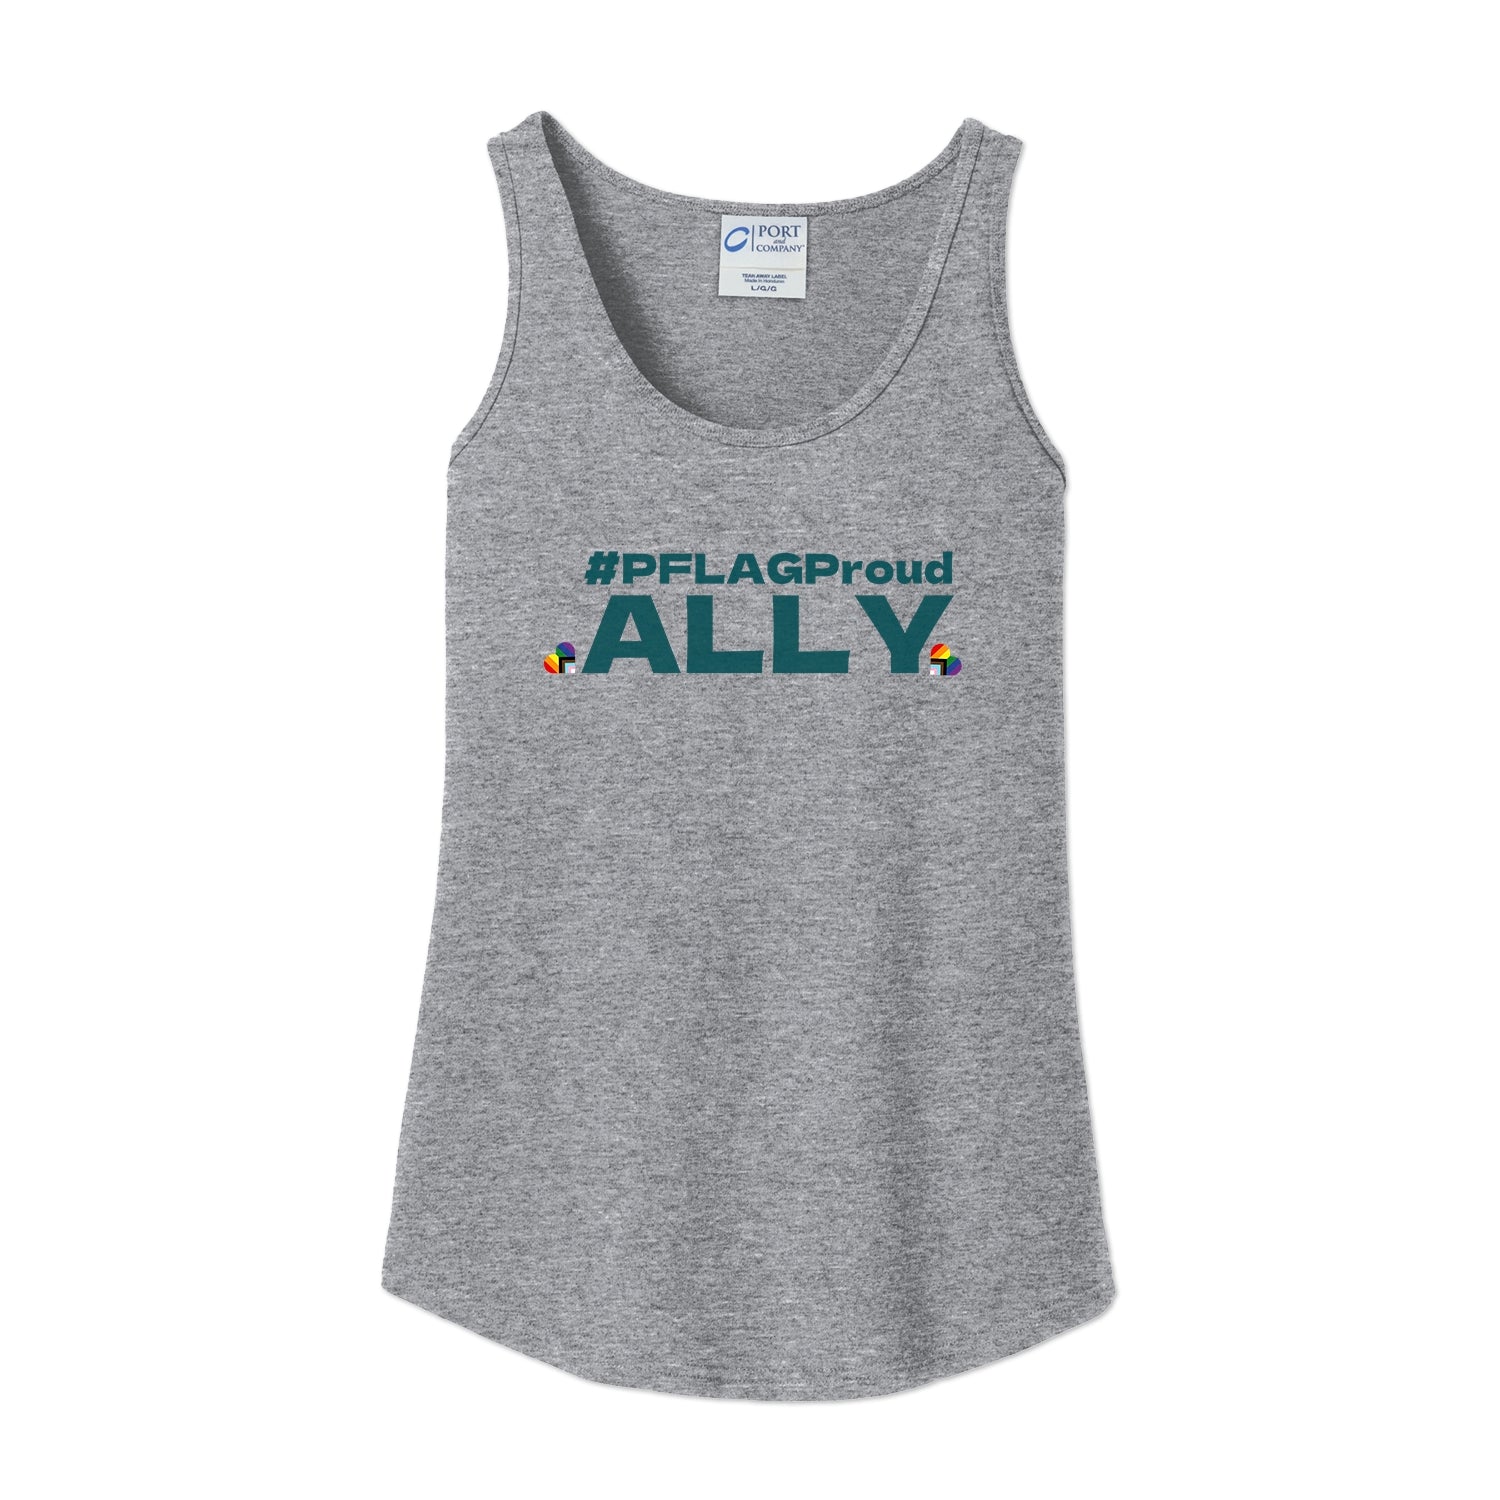 #PFLAGProud Ally - Fitted-Cut Tank Top